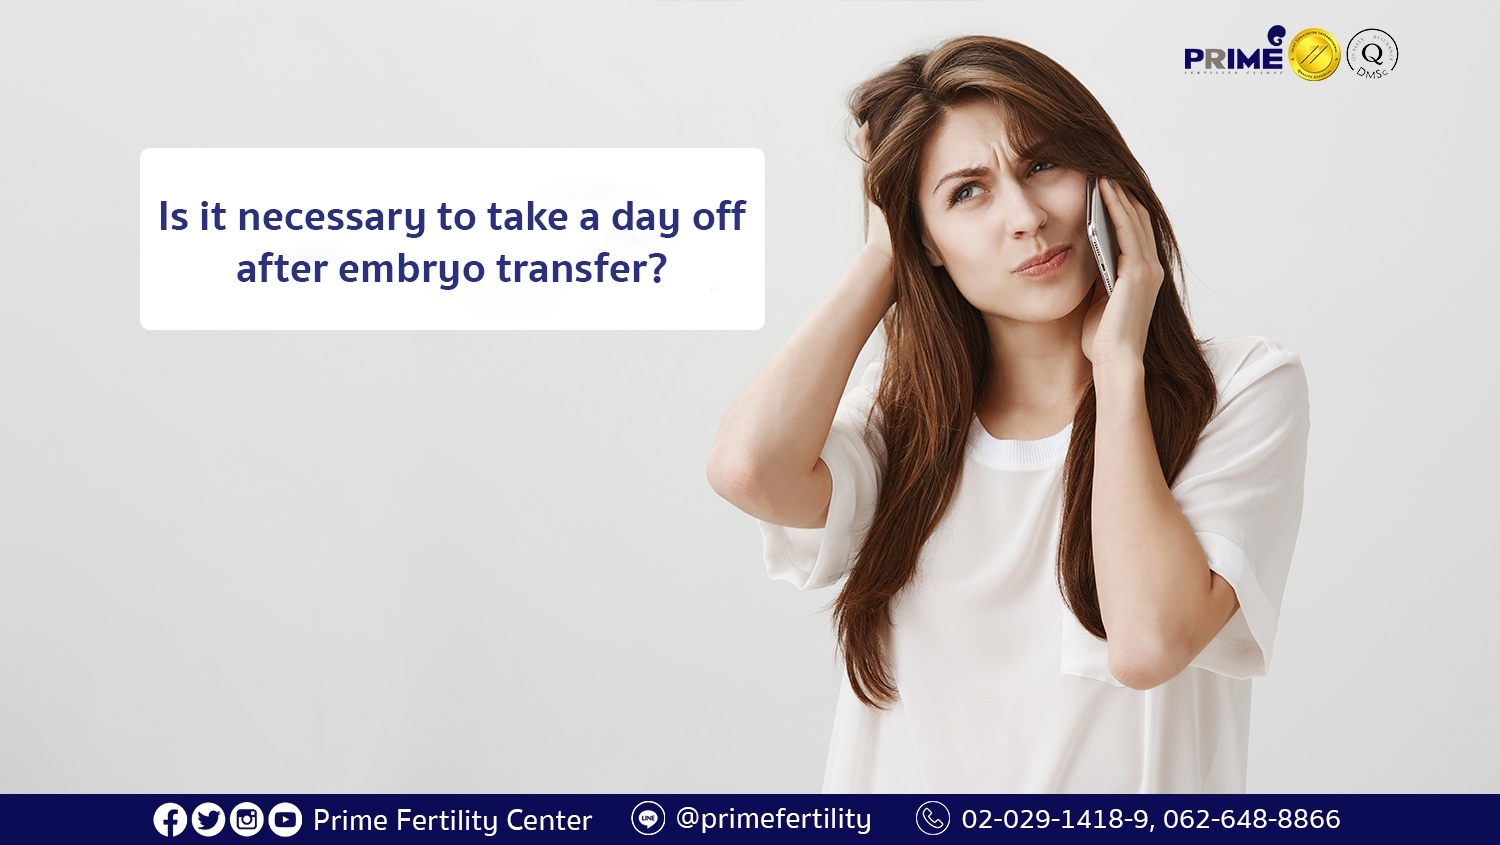 Is it necessary to take a day off after embryo transfer?